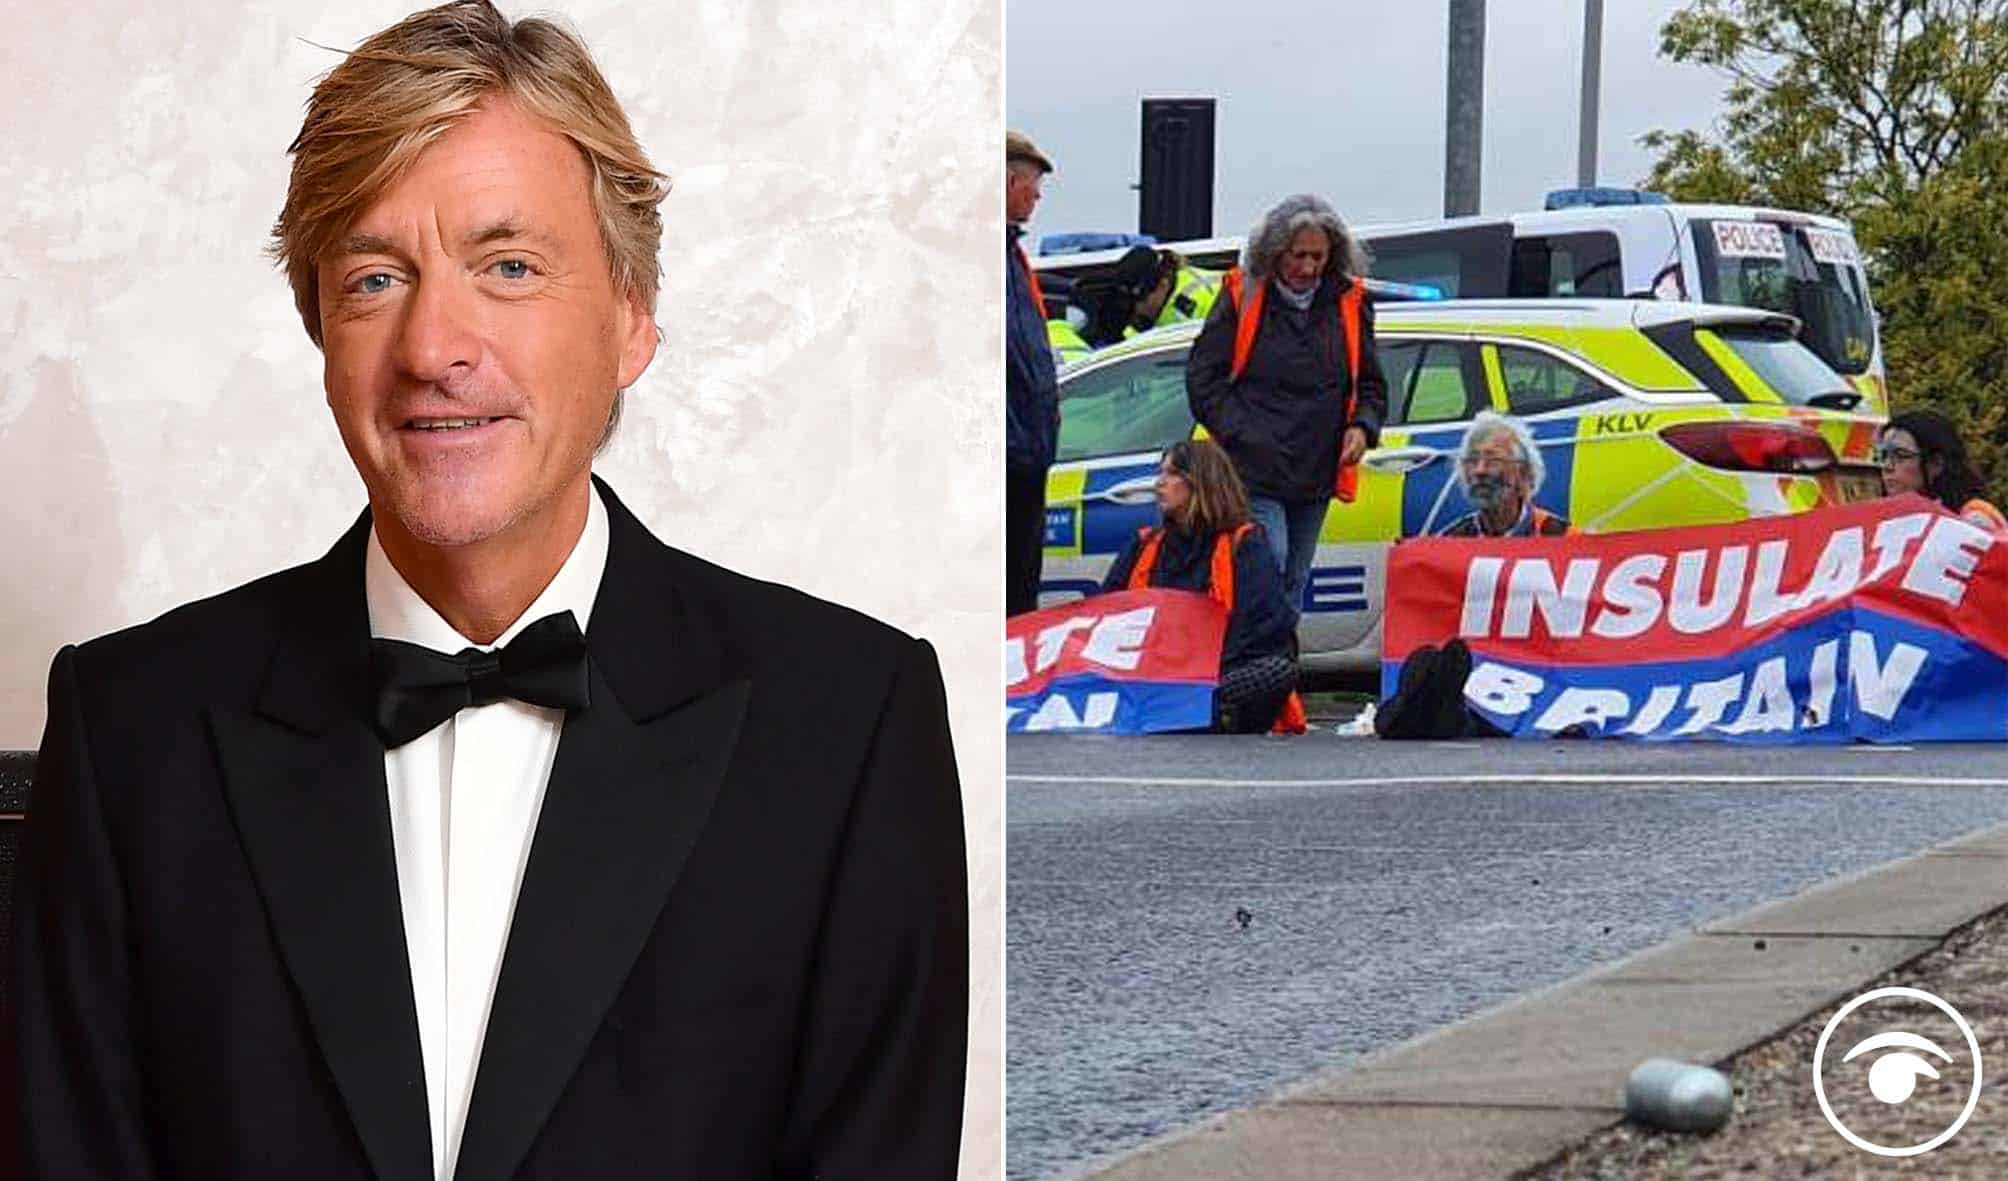 Watch: Reactions as Richard Madeley slammed by Insulate Britain campaigner